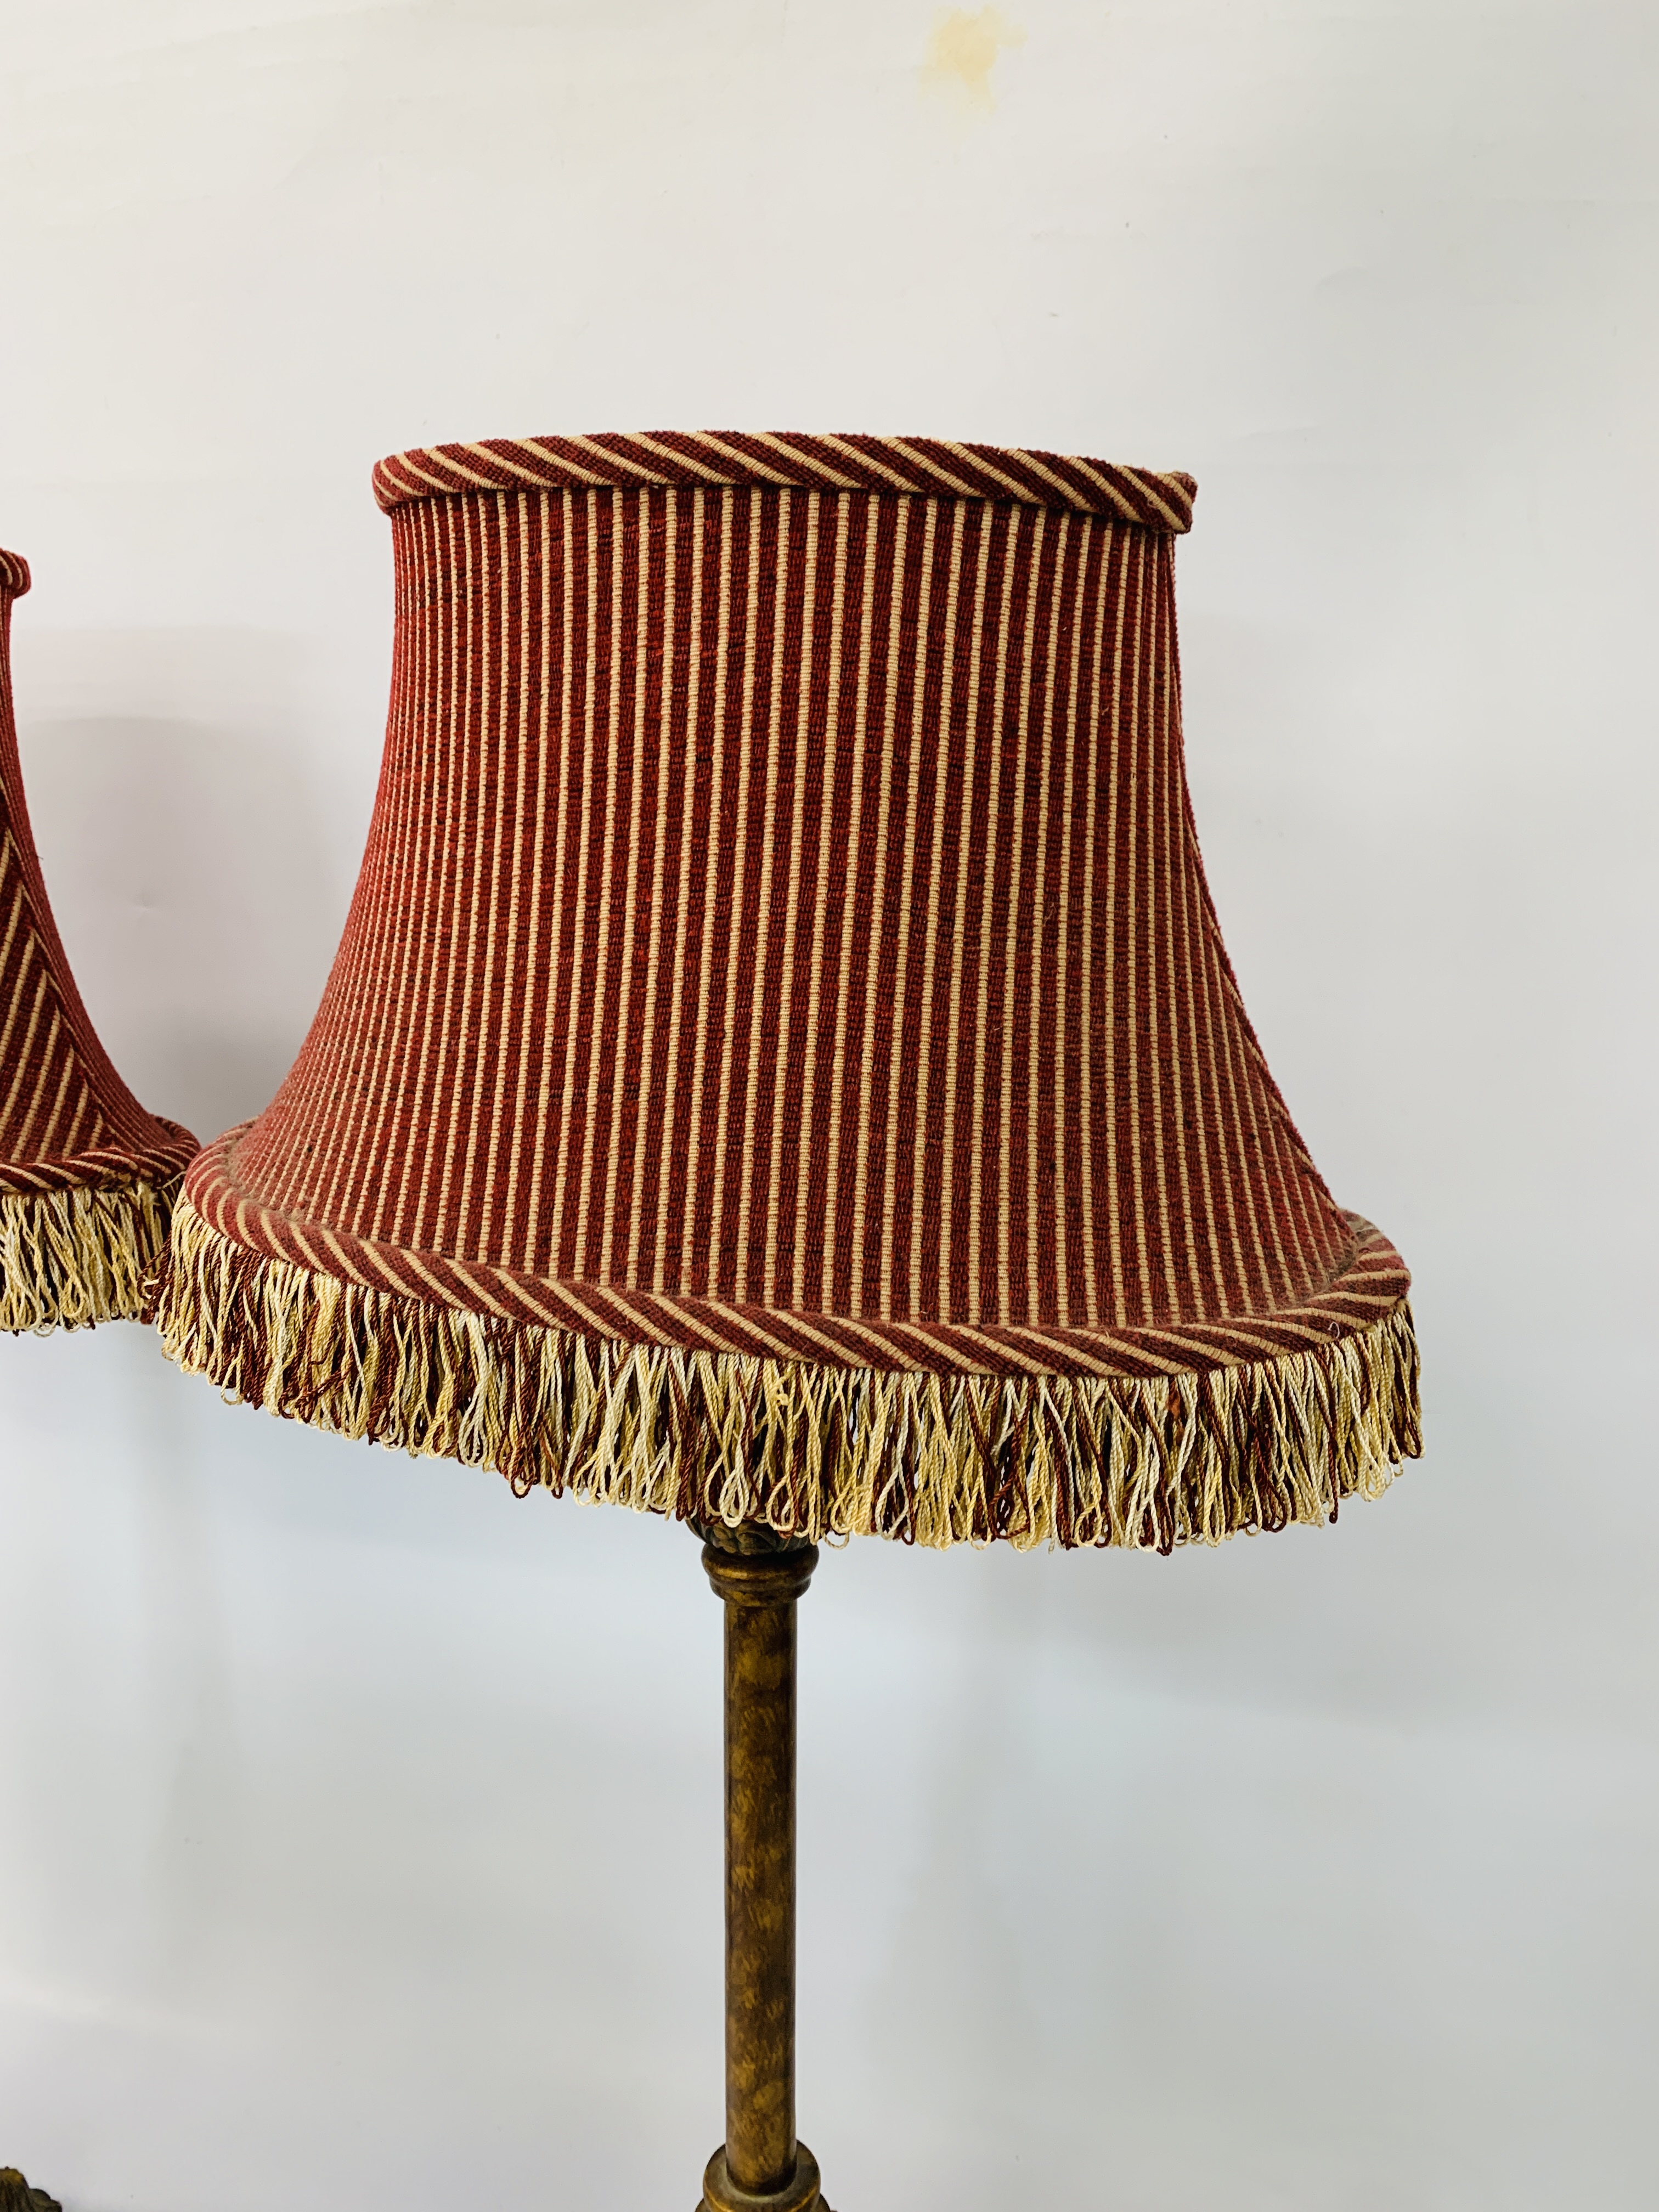 PAIR OF CLASSICAL ANTIQUE EFFECT TABLE LAMPS WITH RED STRIPED FRINGED SHADES HEIGHT 77CM. - Image 7 of 7